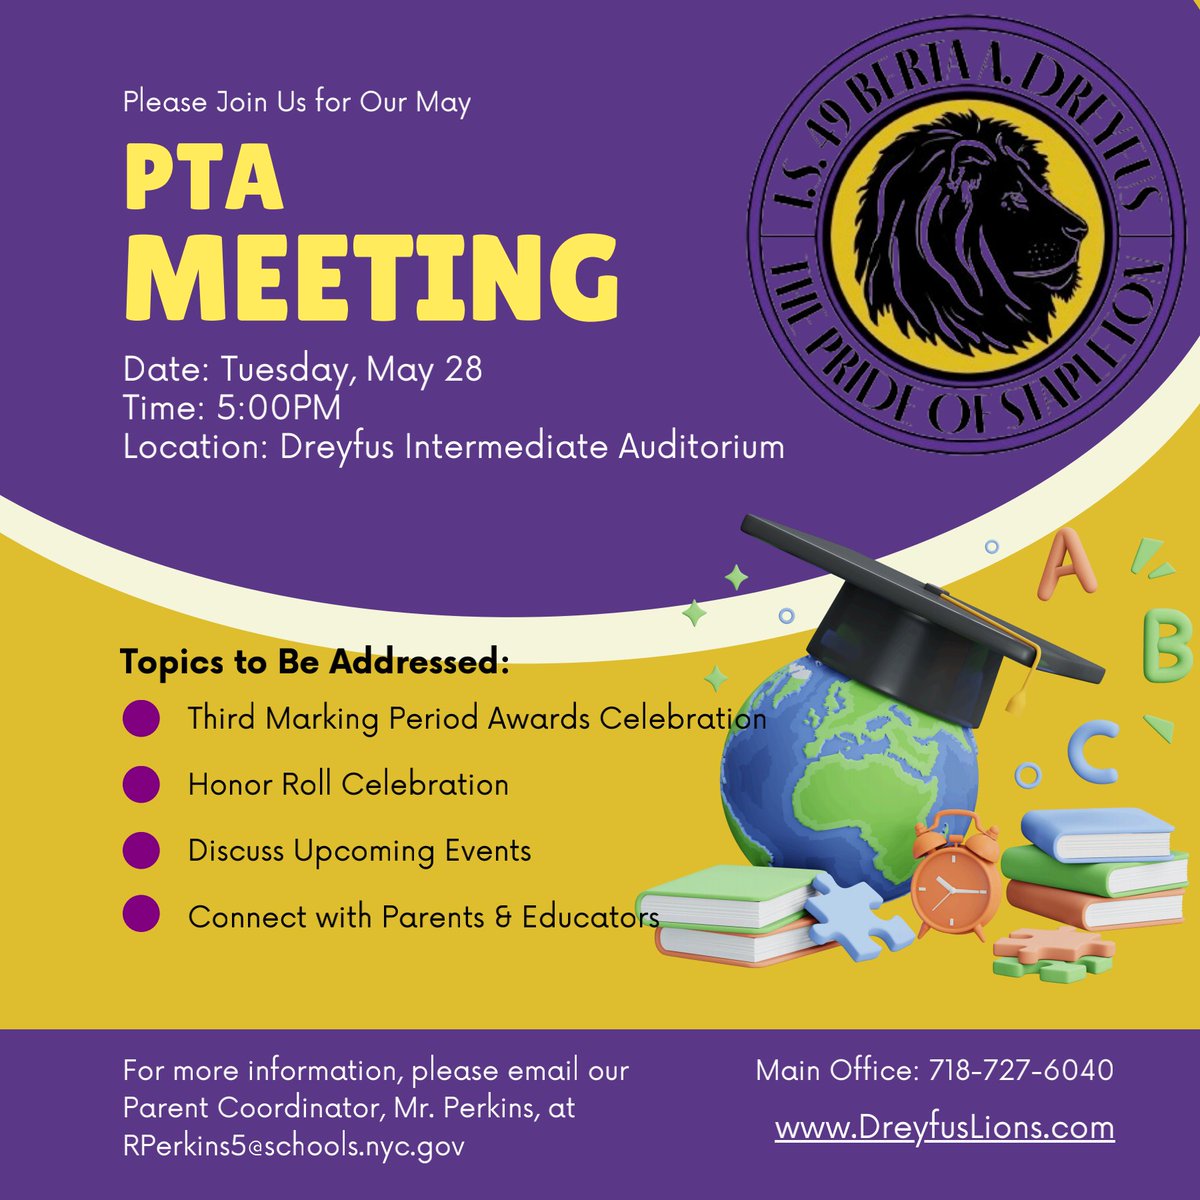 Attention Dreyfus families... Please join us next Tuesday, May 28th, for our PTA meeting. We will be celebrating our Ss who made Honor Roll, as well as giving our 3rd marking period awards. It's a great time to connect with other families and educators, too!